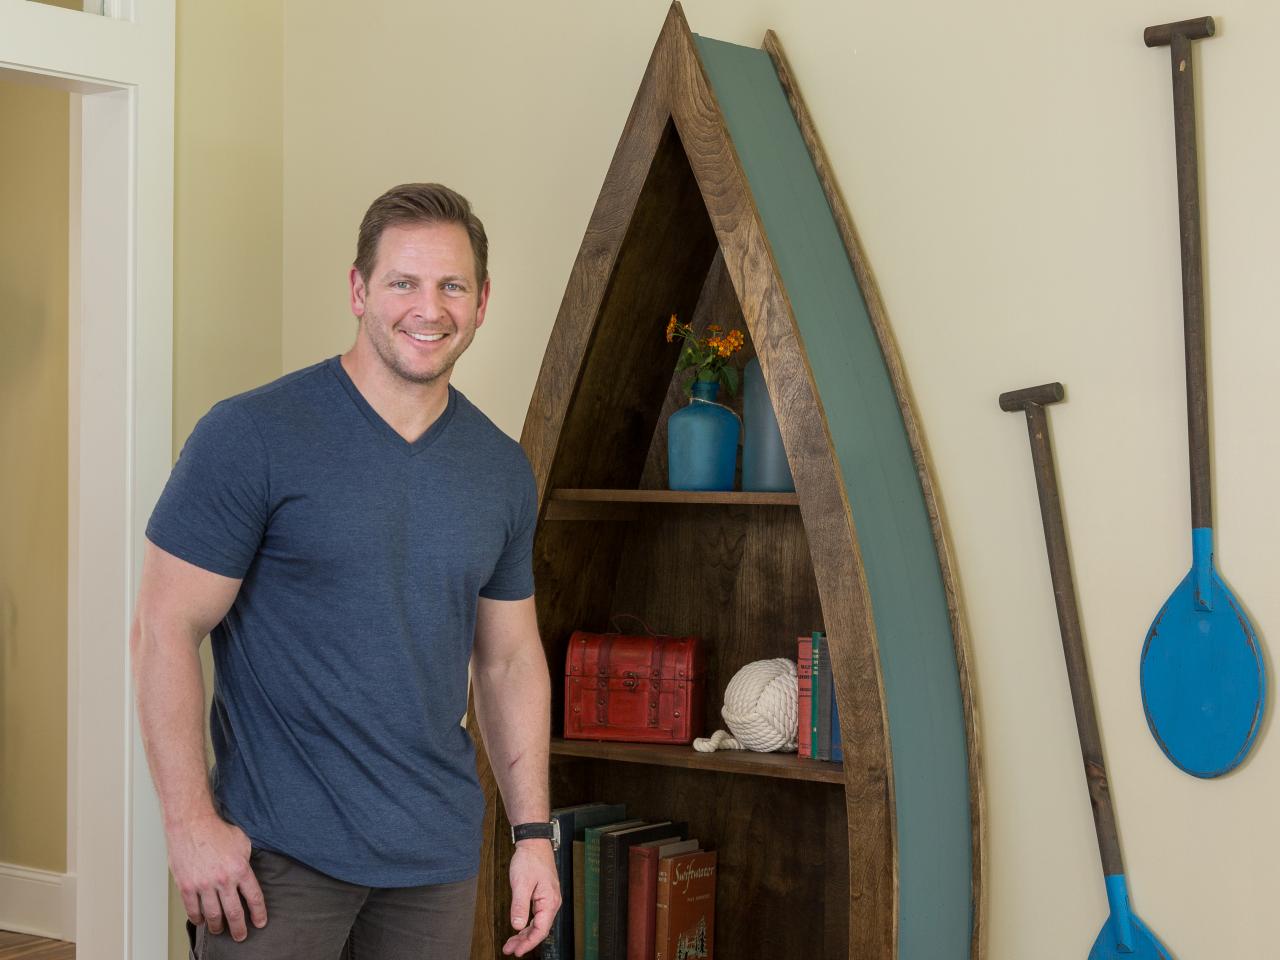 How To Build A Lake Inspired Boat Shelf, Shelves For Boats